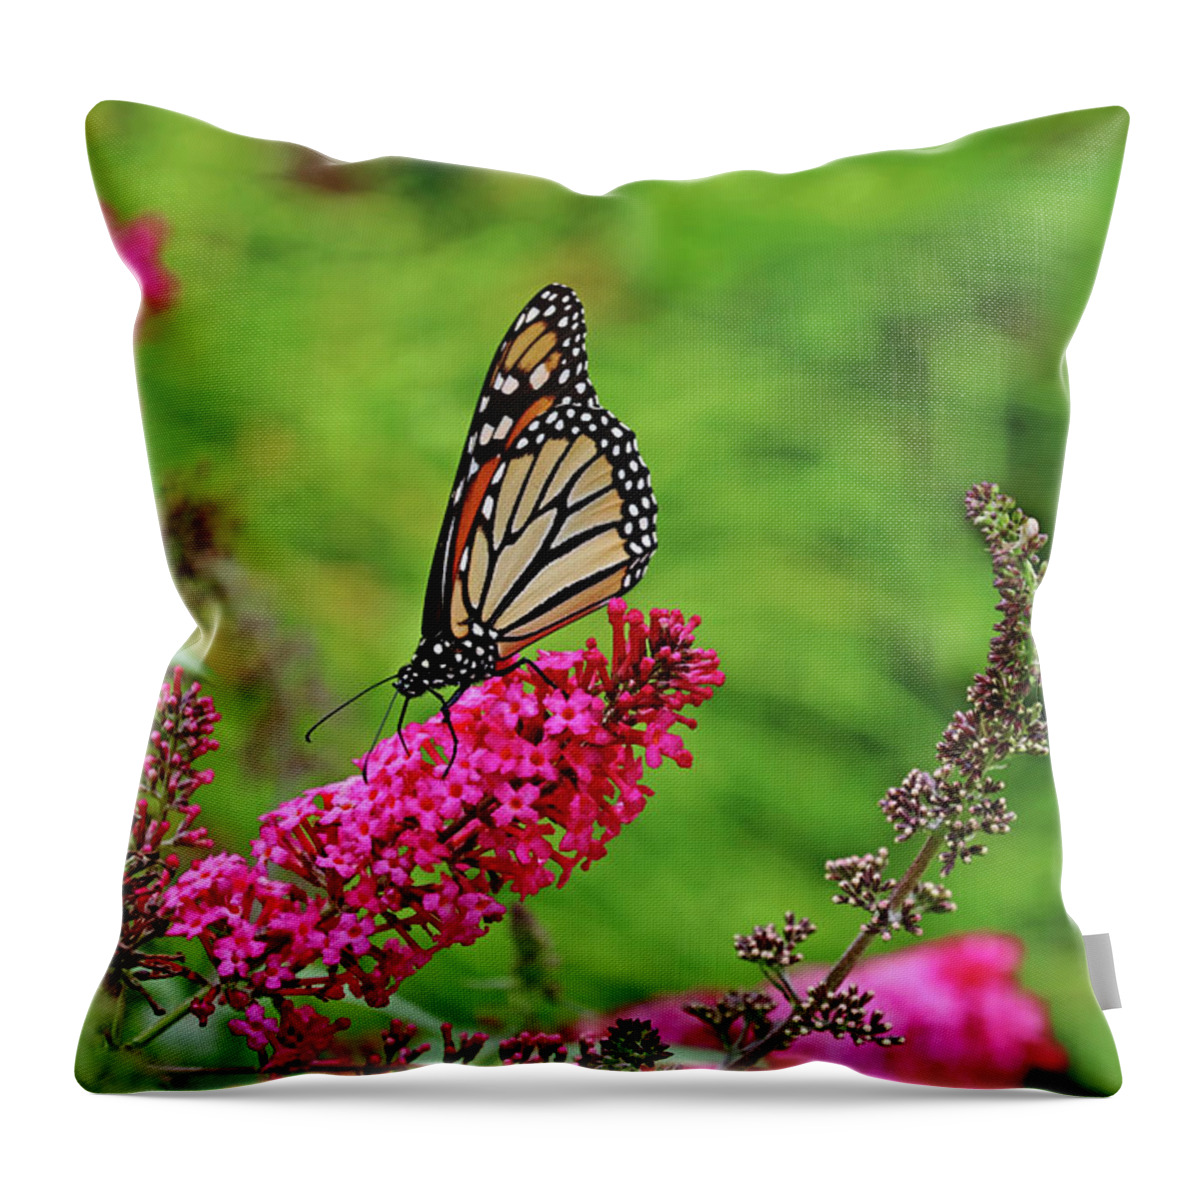 Butterfly Throw Pillow featuring the photograph Monarch In The Garden by Debbie Oppermann